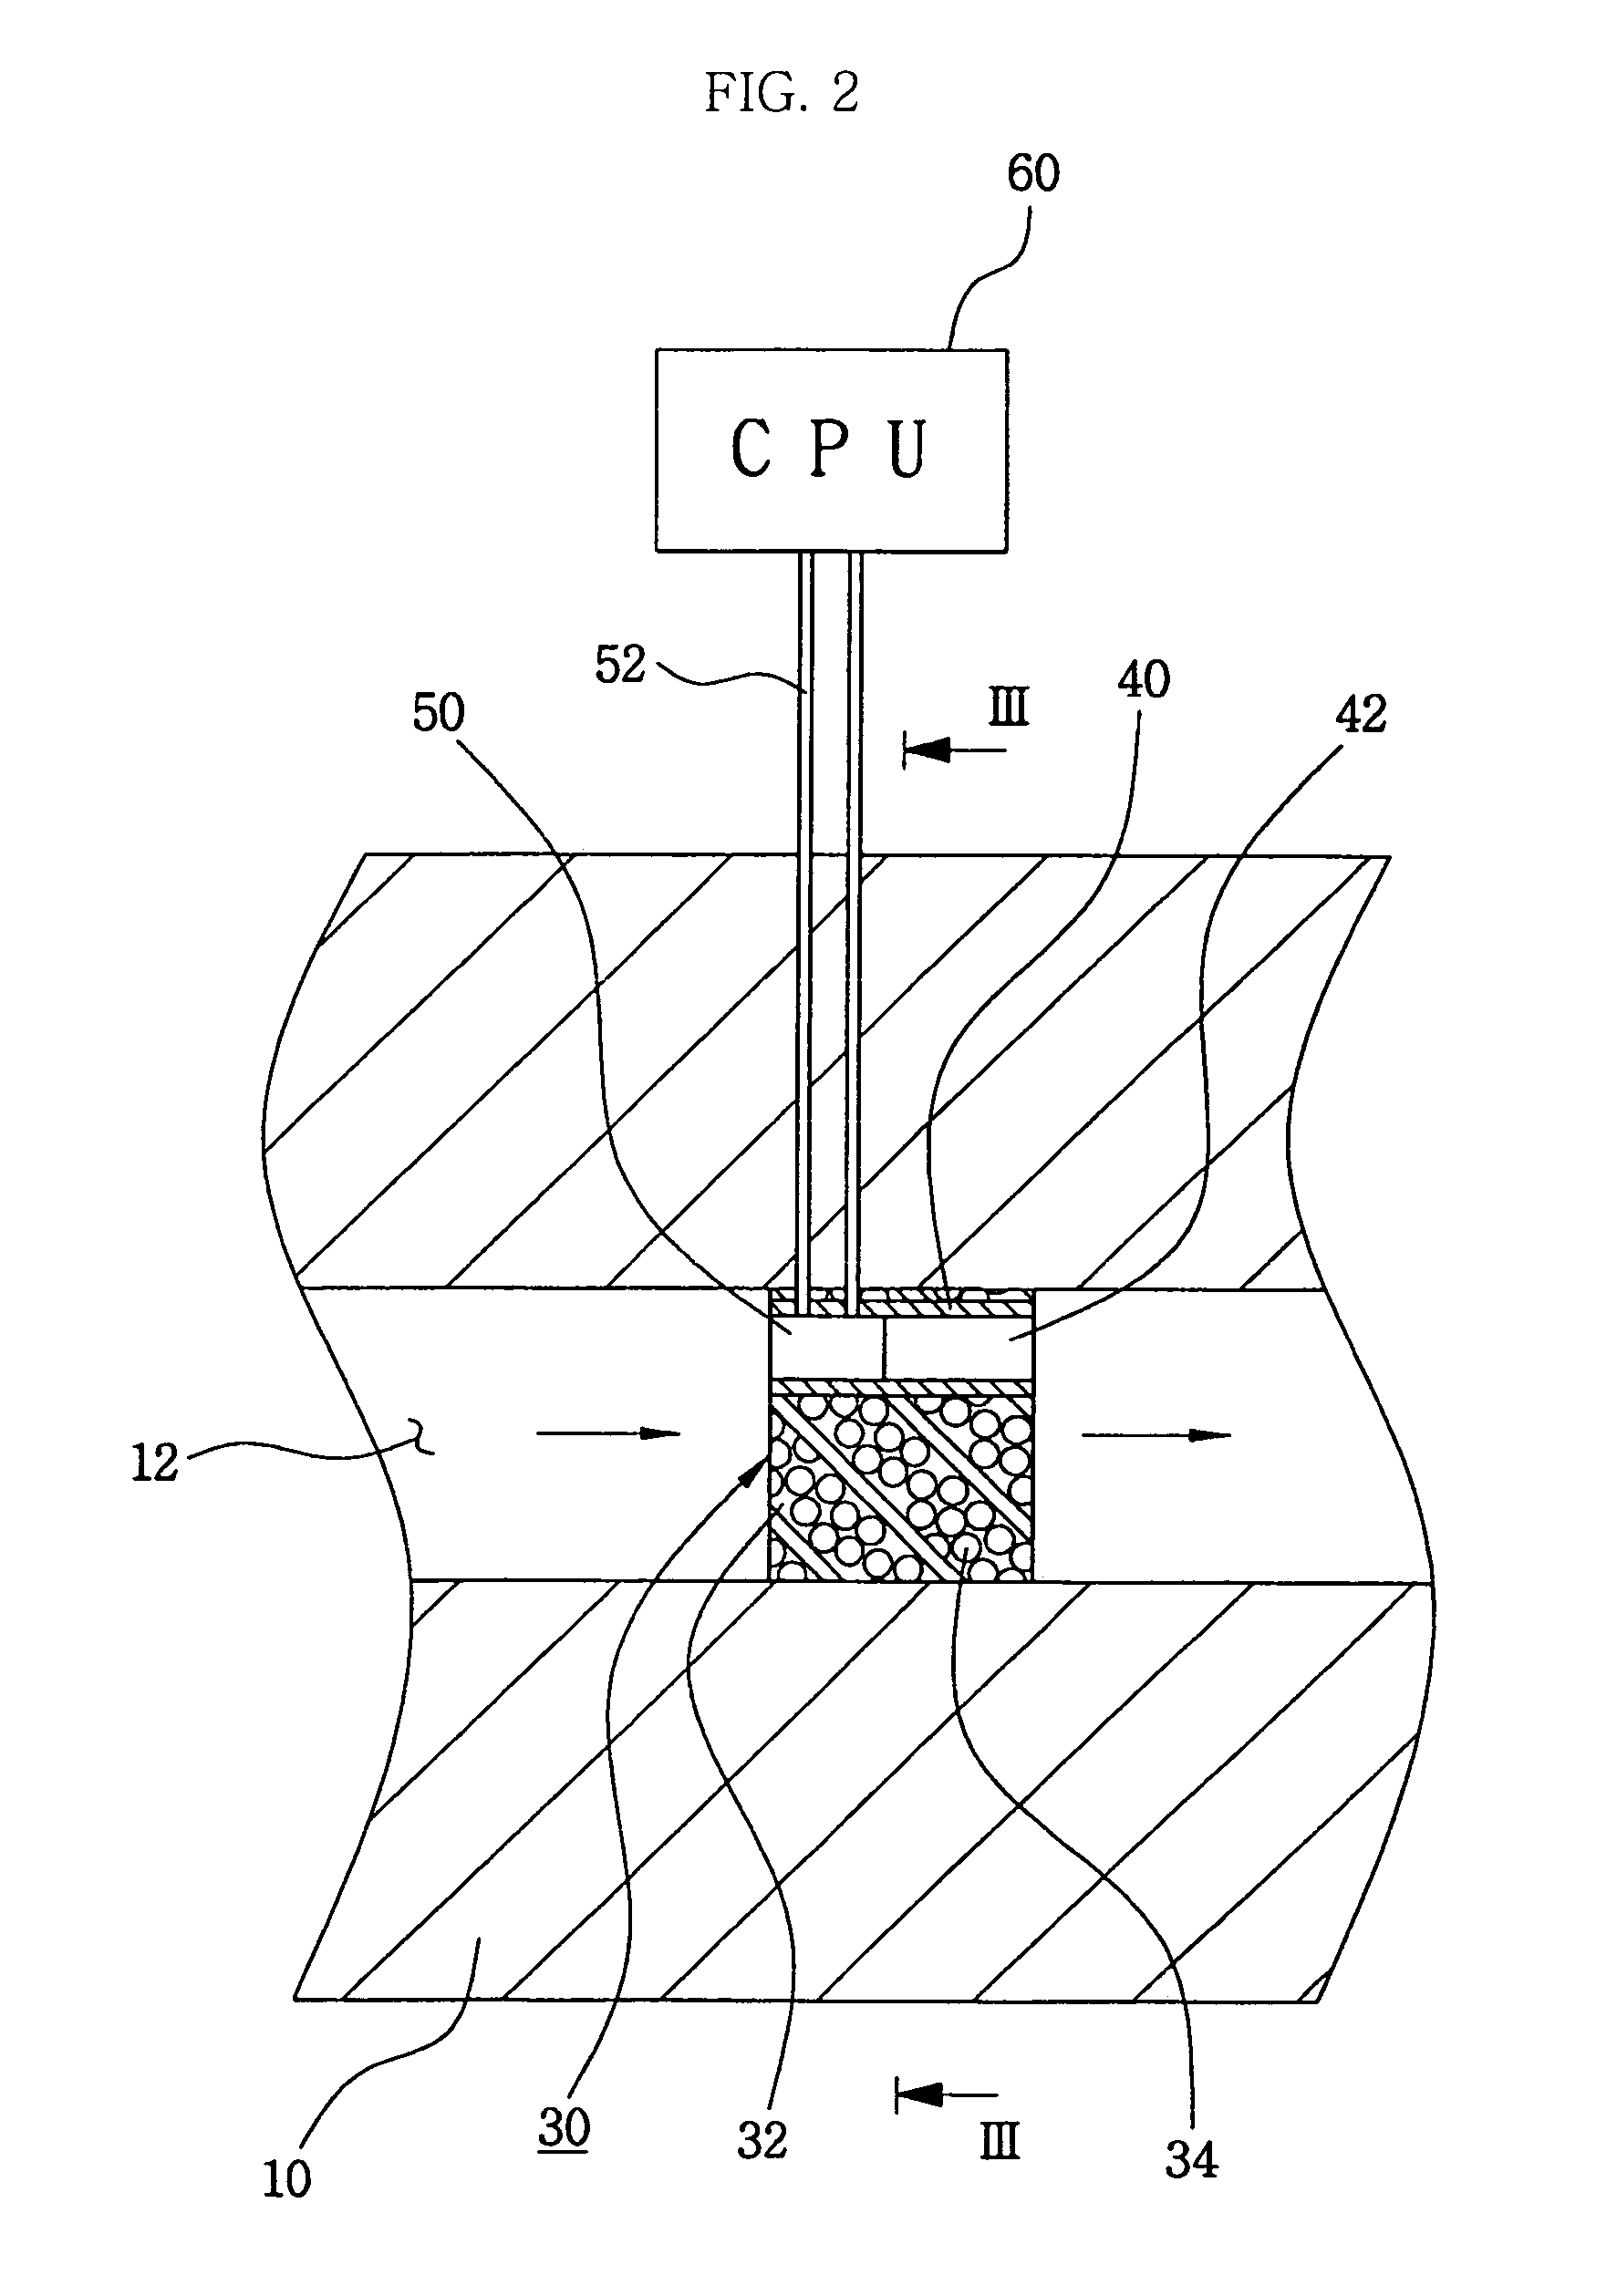 Apparatus for controlling flow rate of gases used in semiconductor device by differential pressure